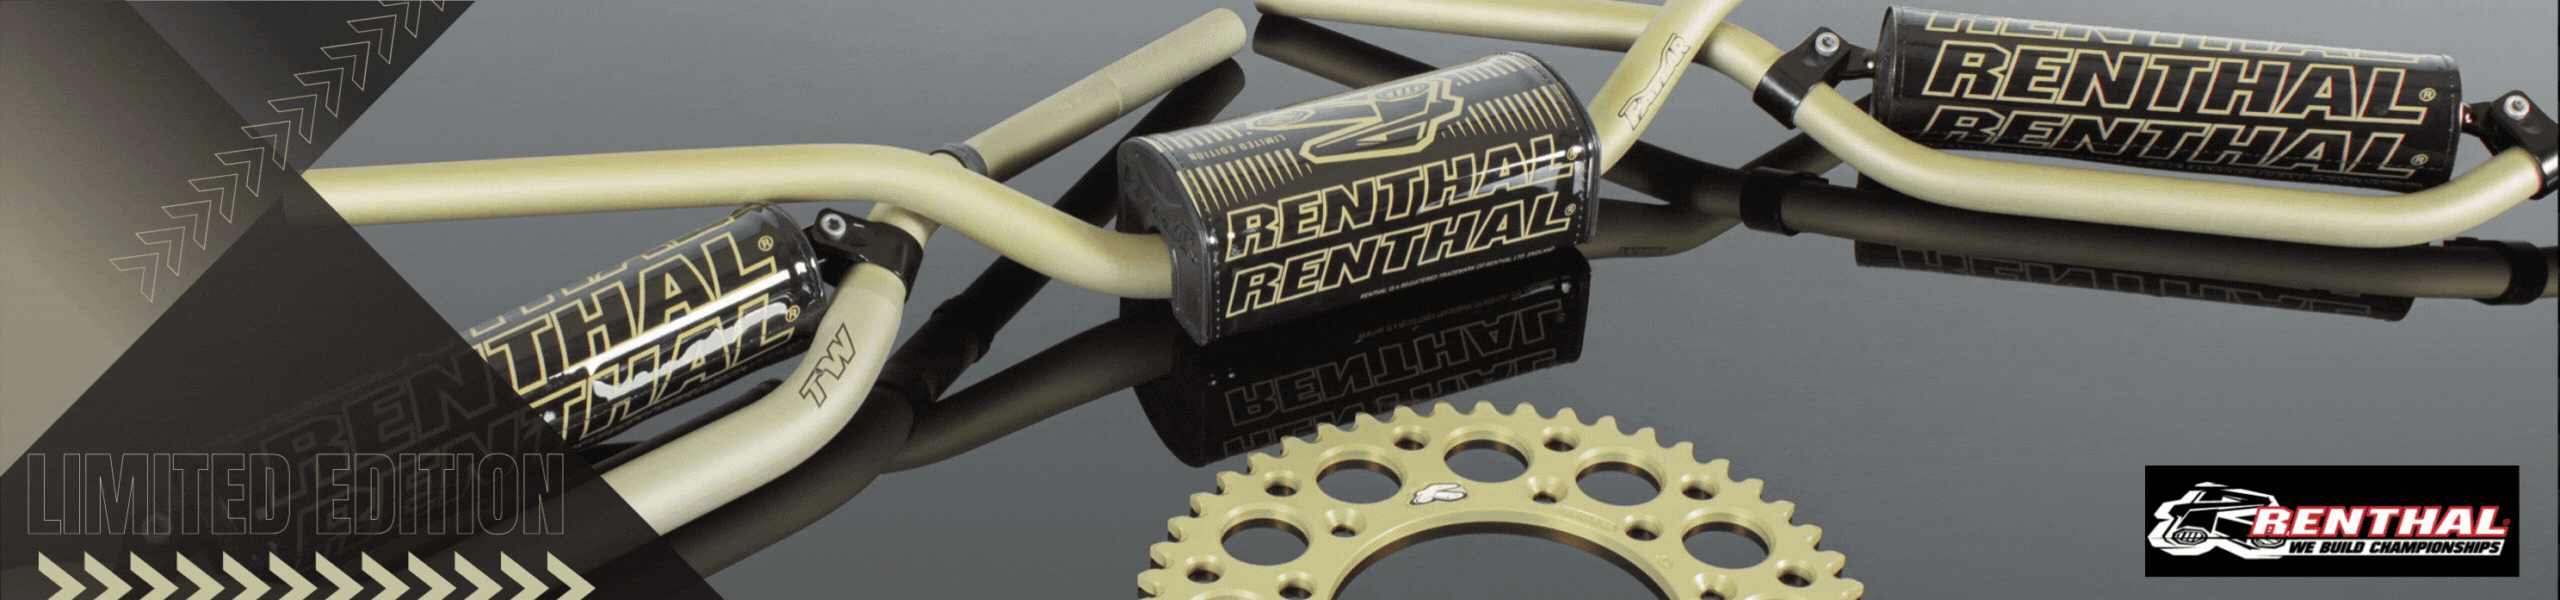 Renthal Chains. Renthal Sprockets. Renthal for sale.